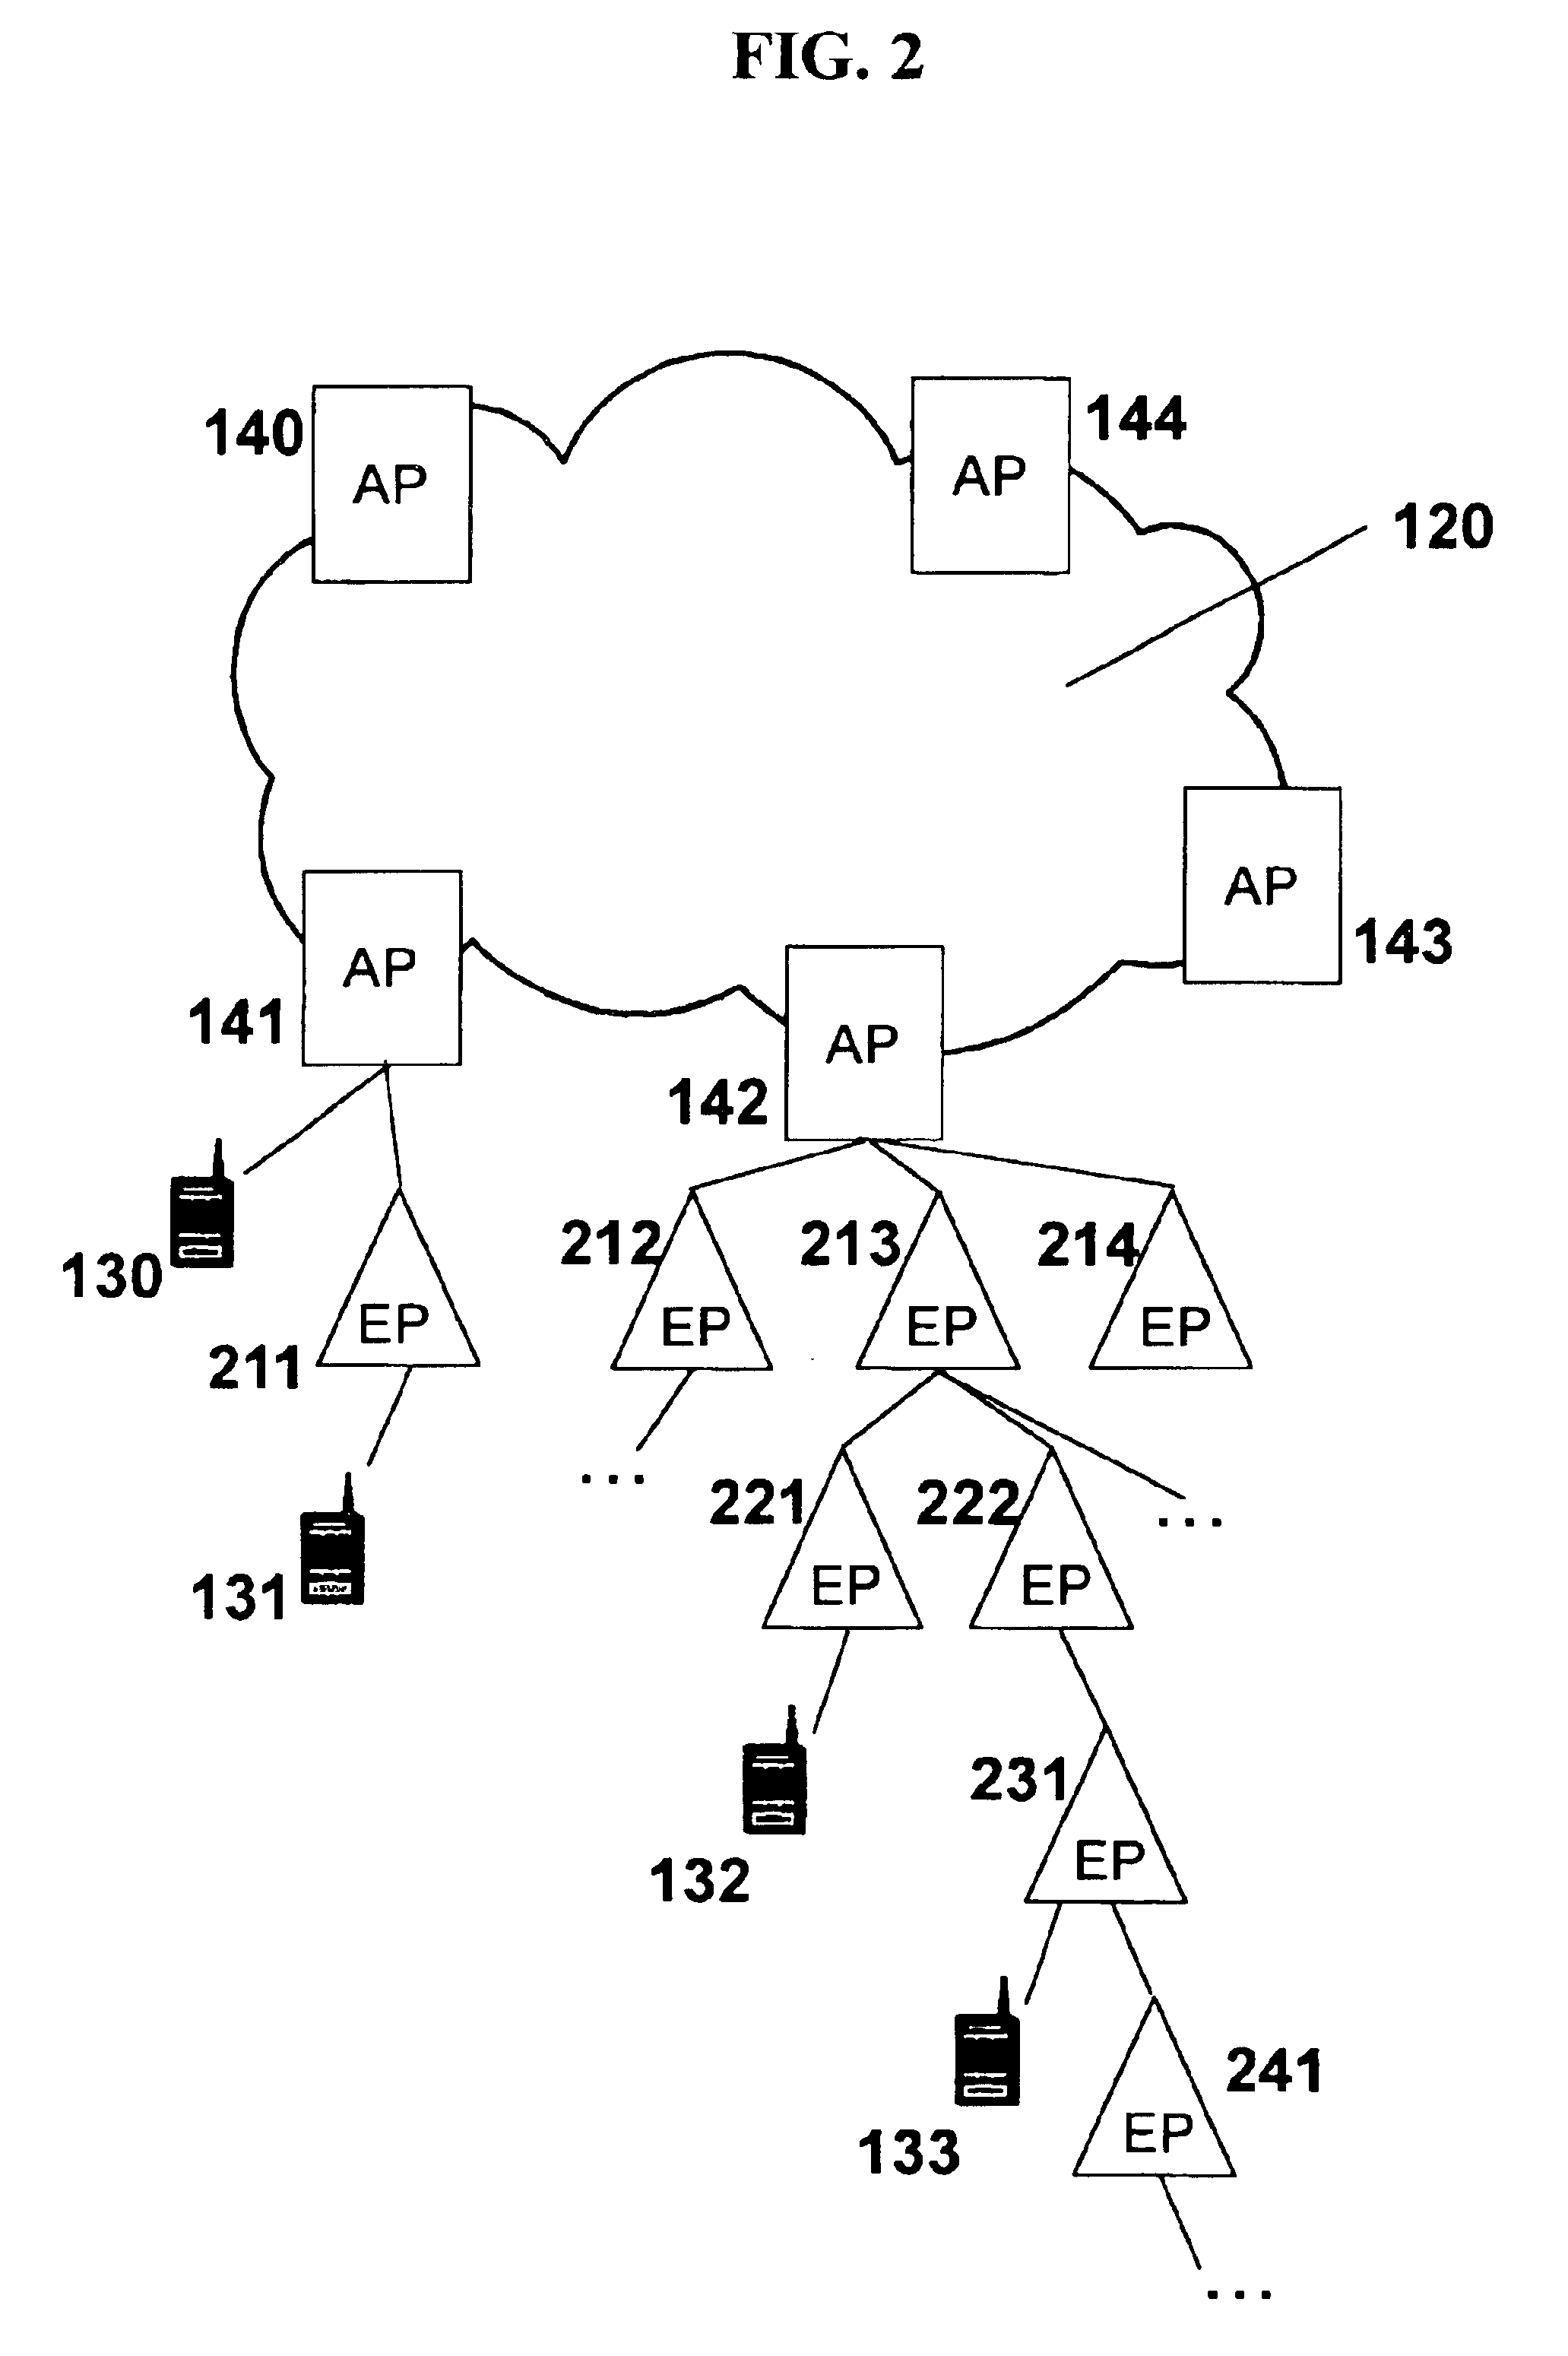 Extension mechanism and technique for enabling low-power end devices to access remote networks using short-range wireless communications means